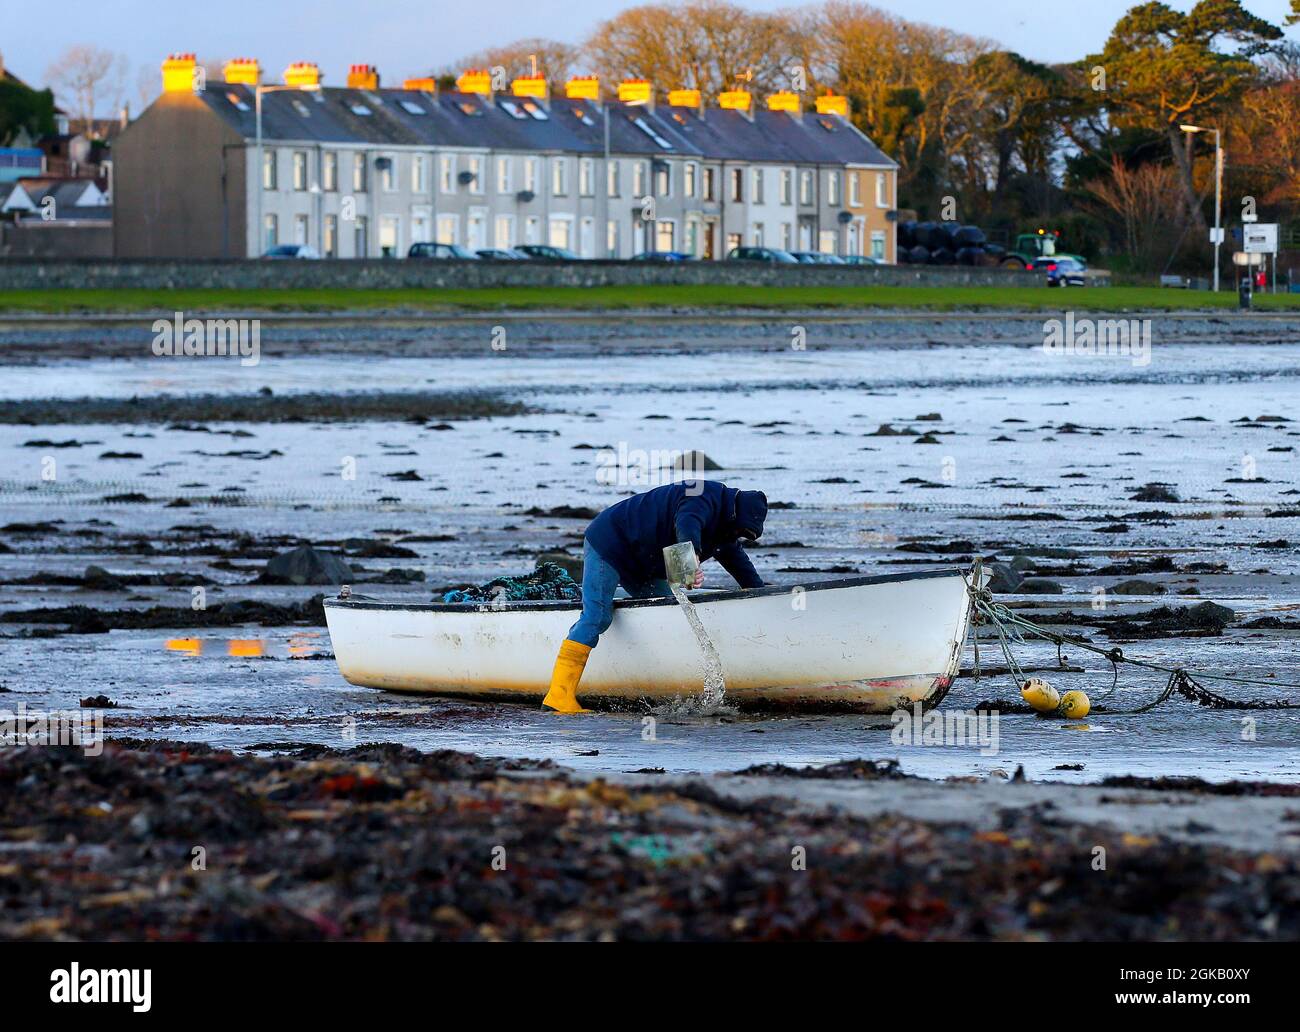 A fisherman bails out the excess water from his boat as the sun sets over the Irish Sea on Ballywalter Beach in Co. Down, Northern Ireland. Stock Photo